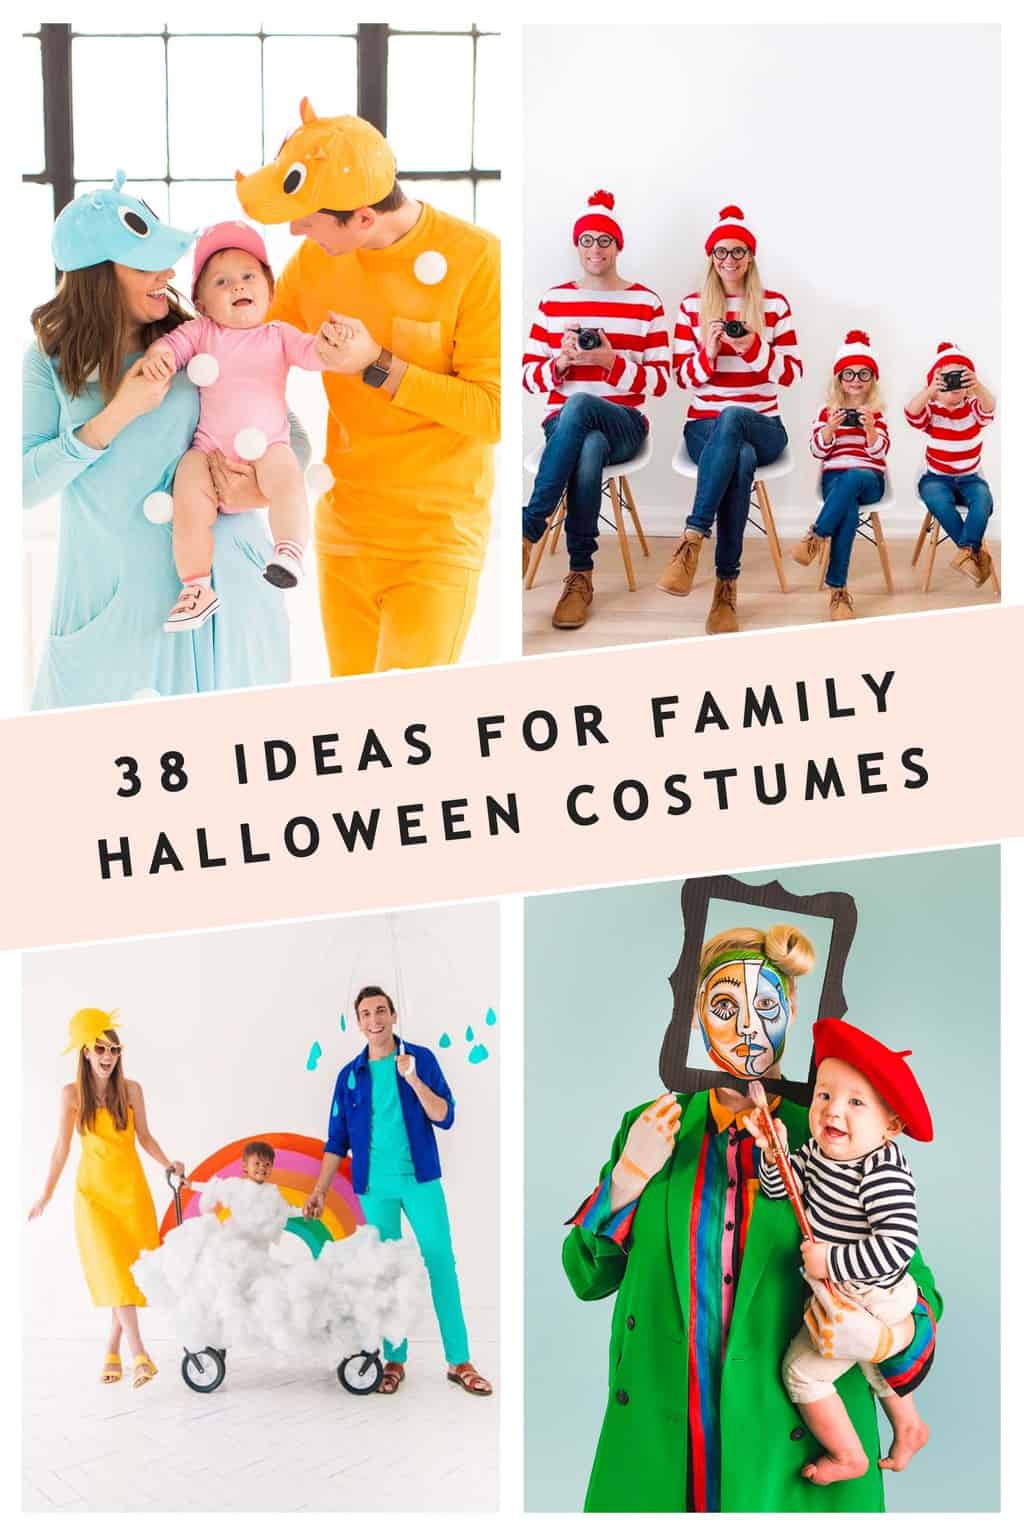 Family Costume Ideas 39 Ideas for Family Halloween Costumes